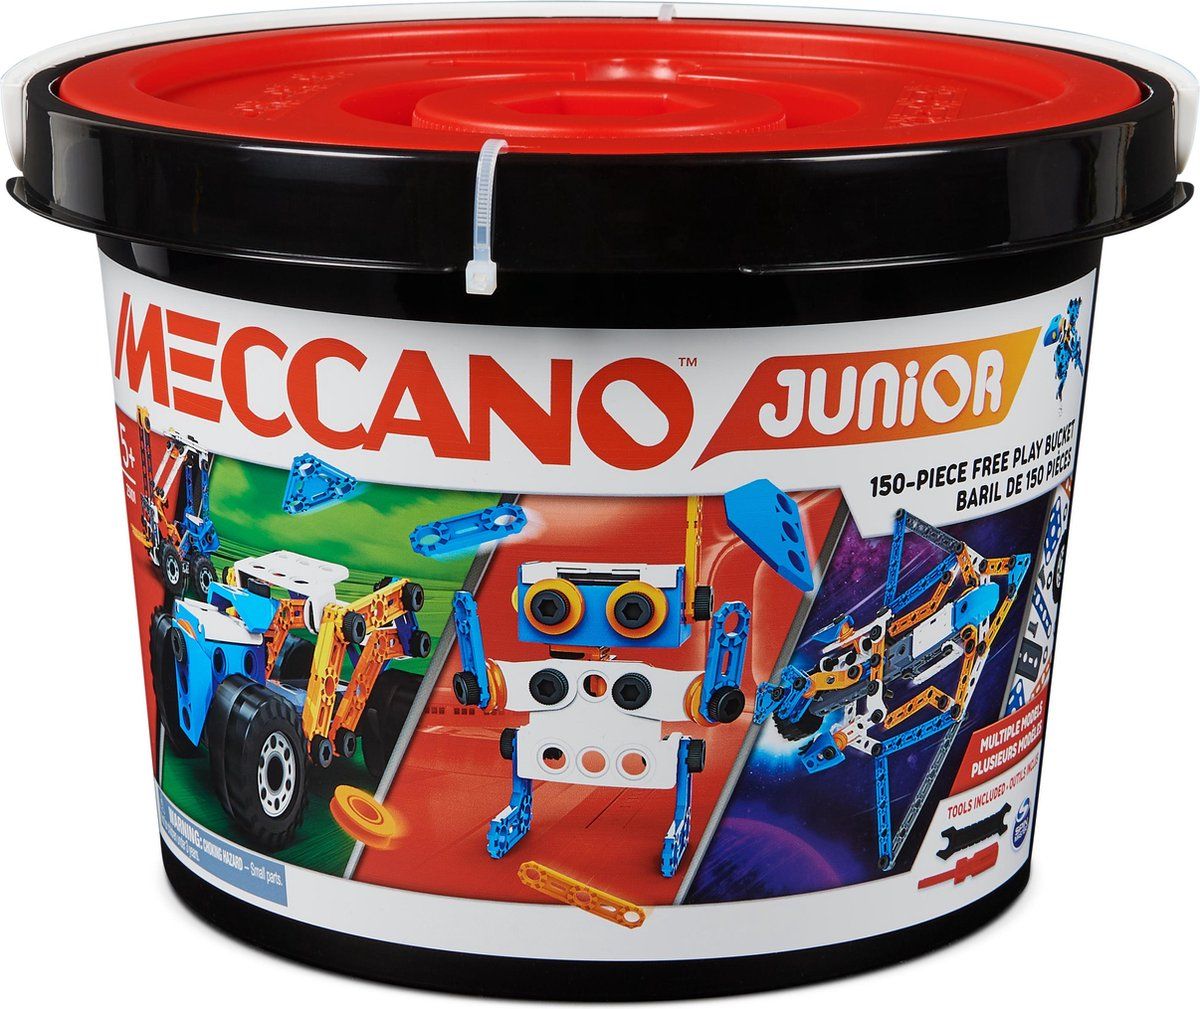 World's last dedicated Meccano toy factory to close next year in